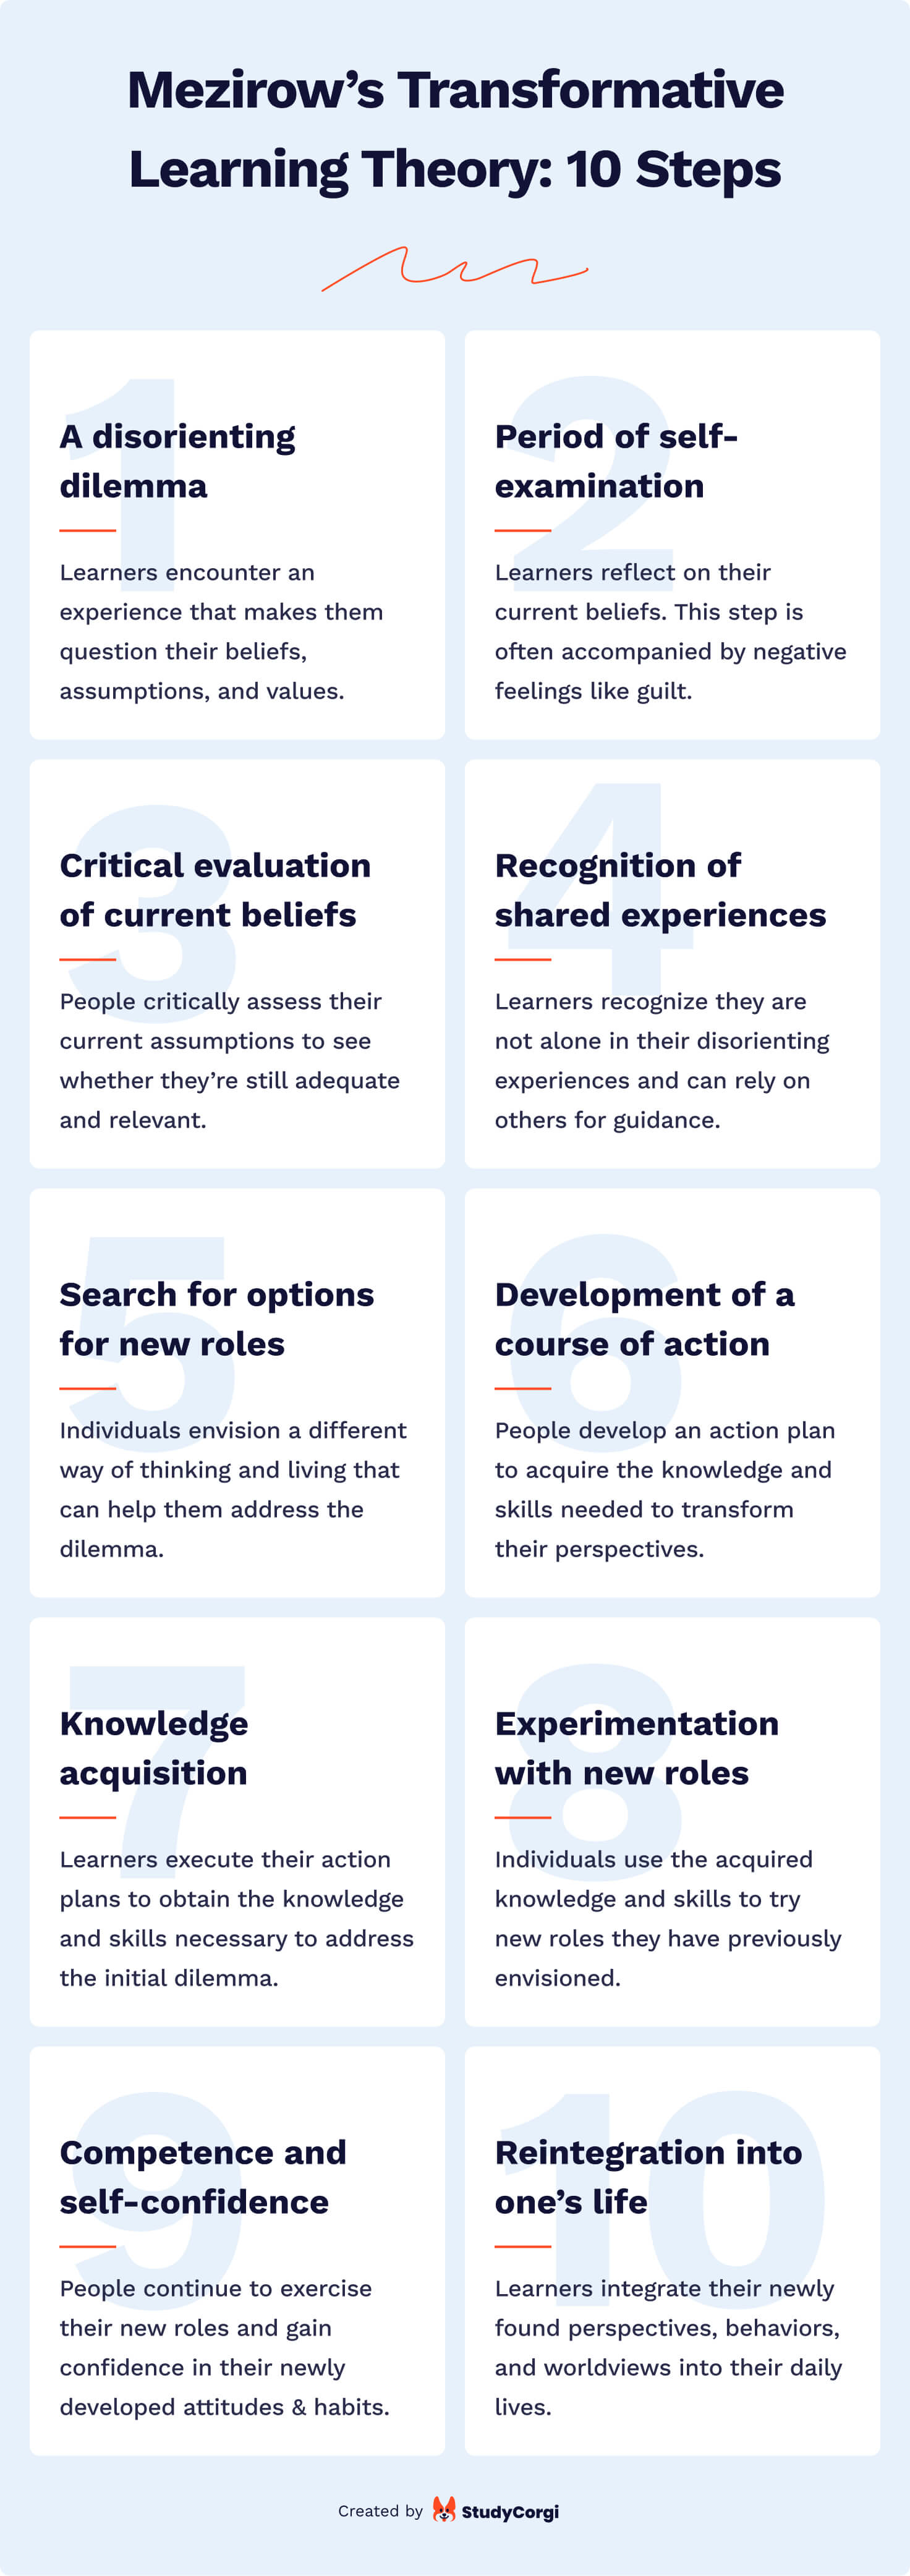 This image shows the 10 steps of Mezirow's transformative learning theory.